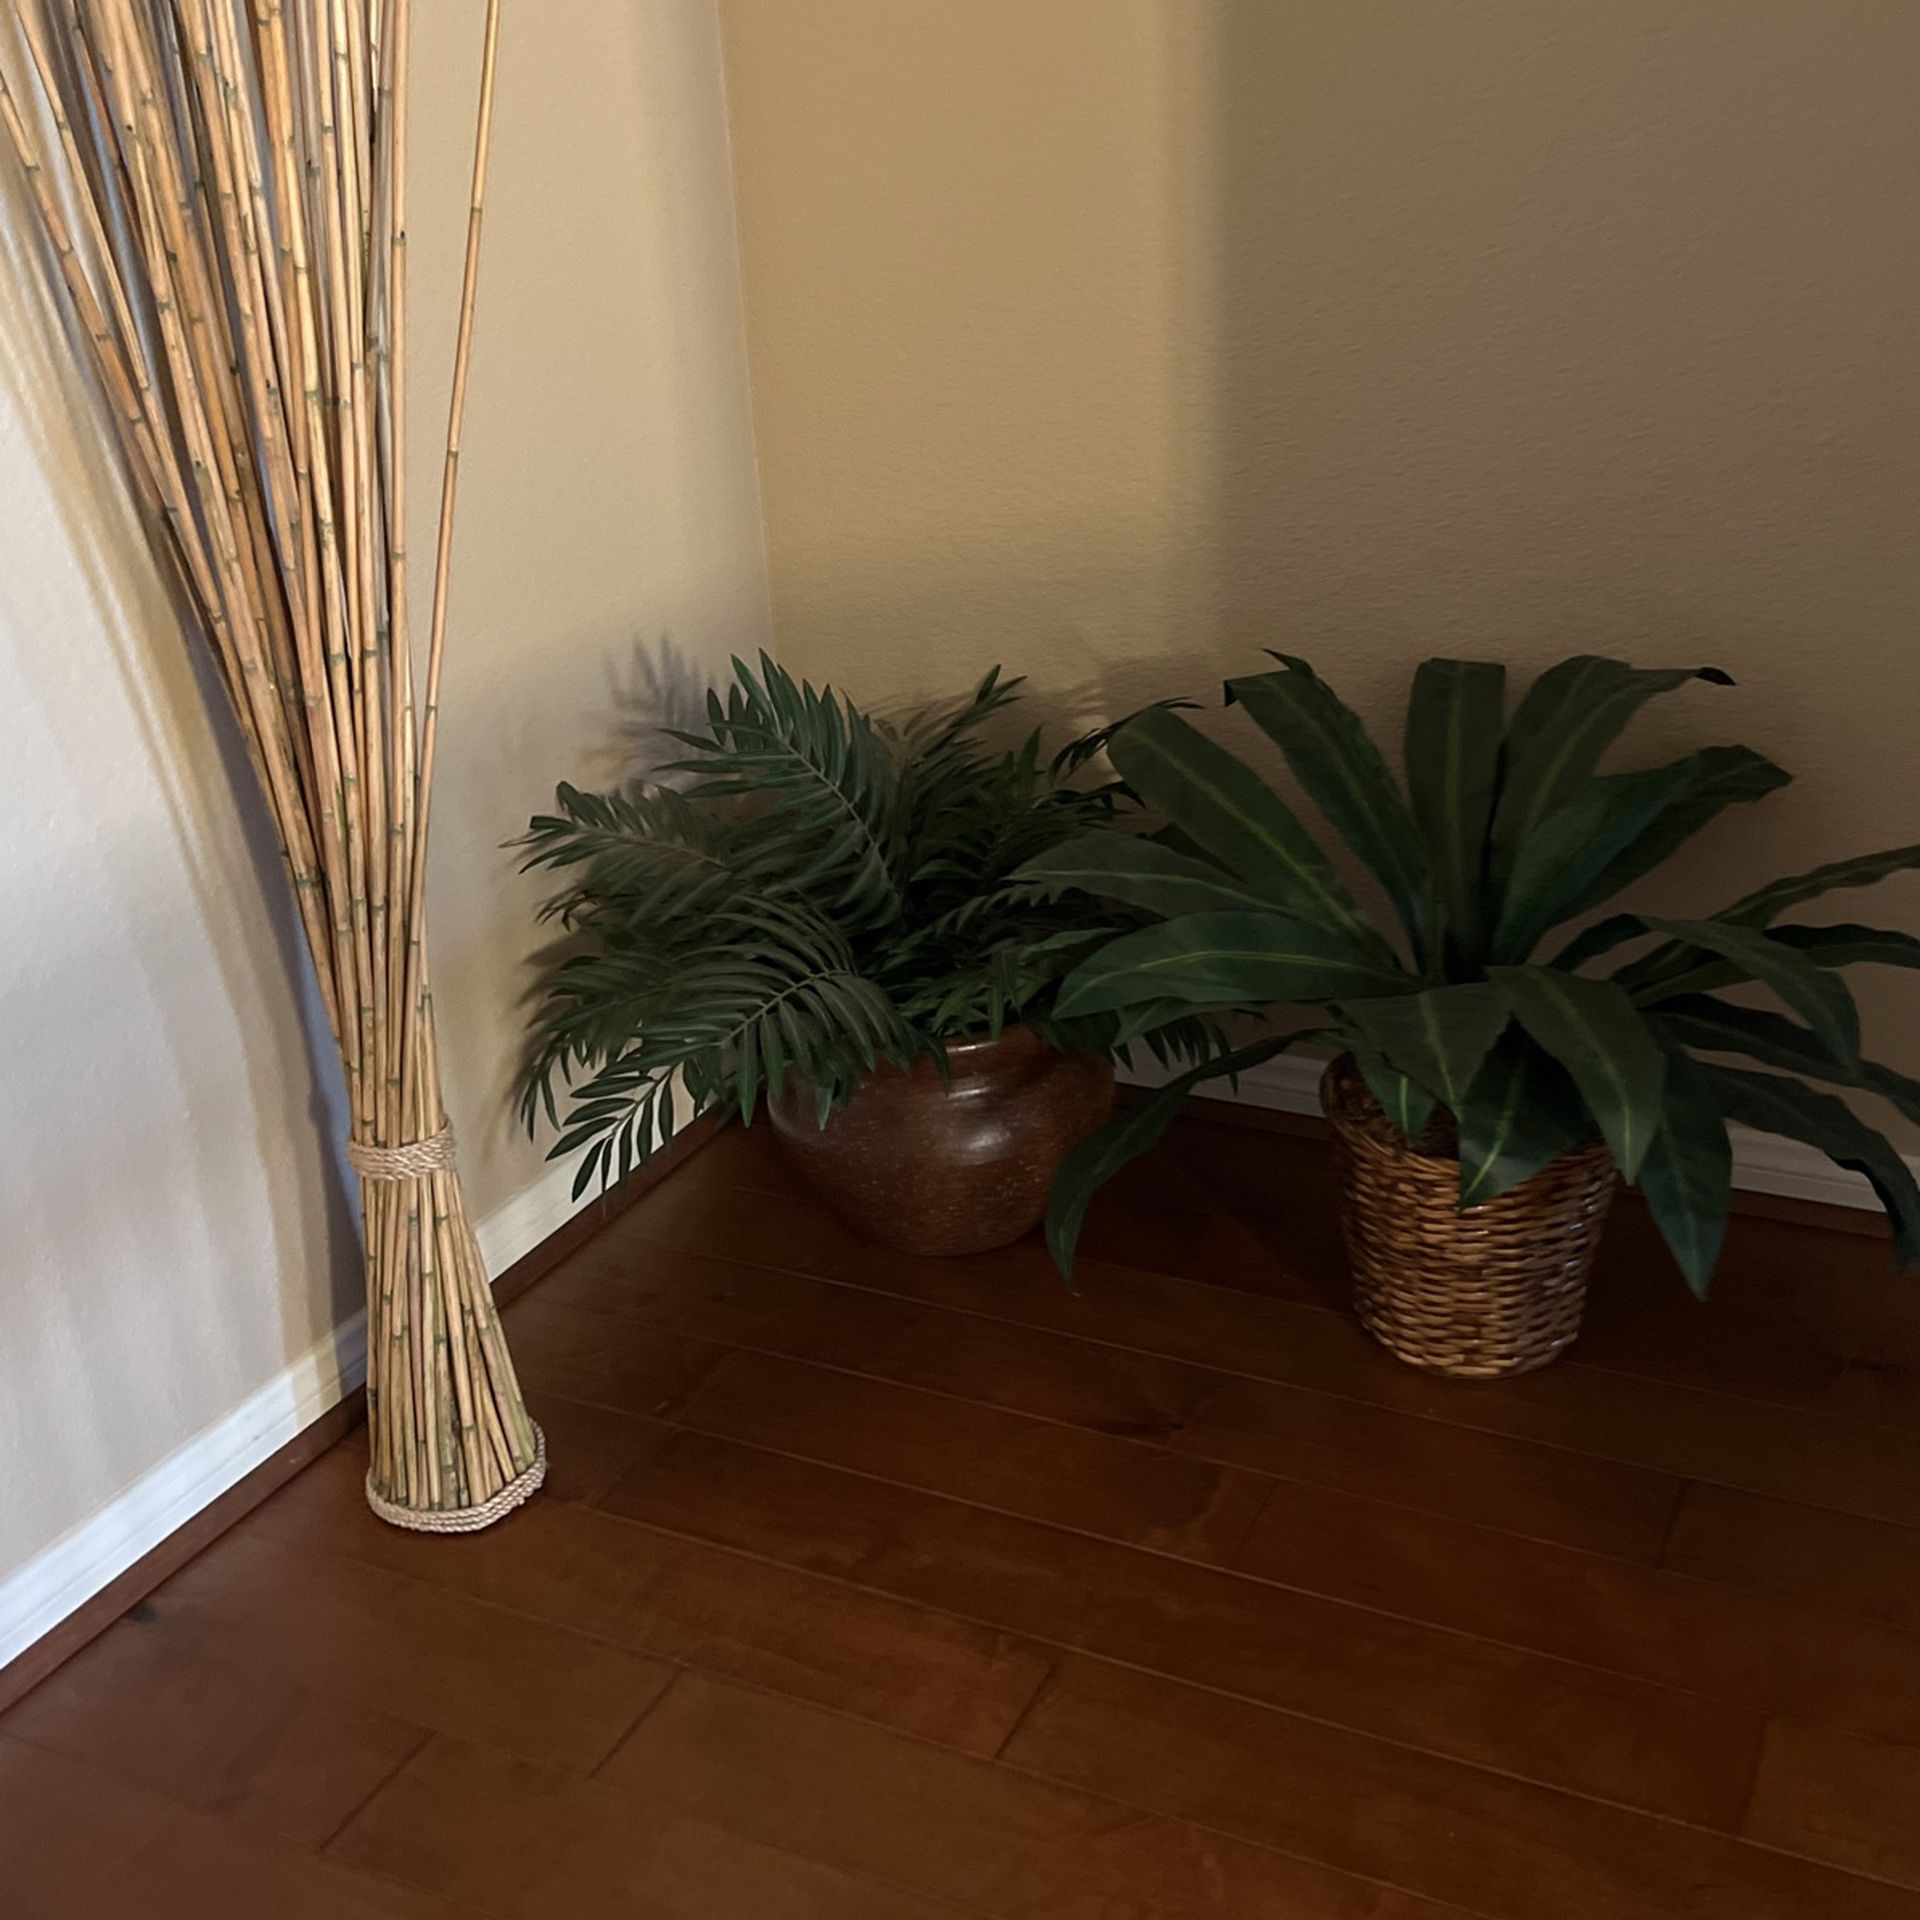 Plants and Decorative Bamboo